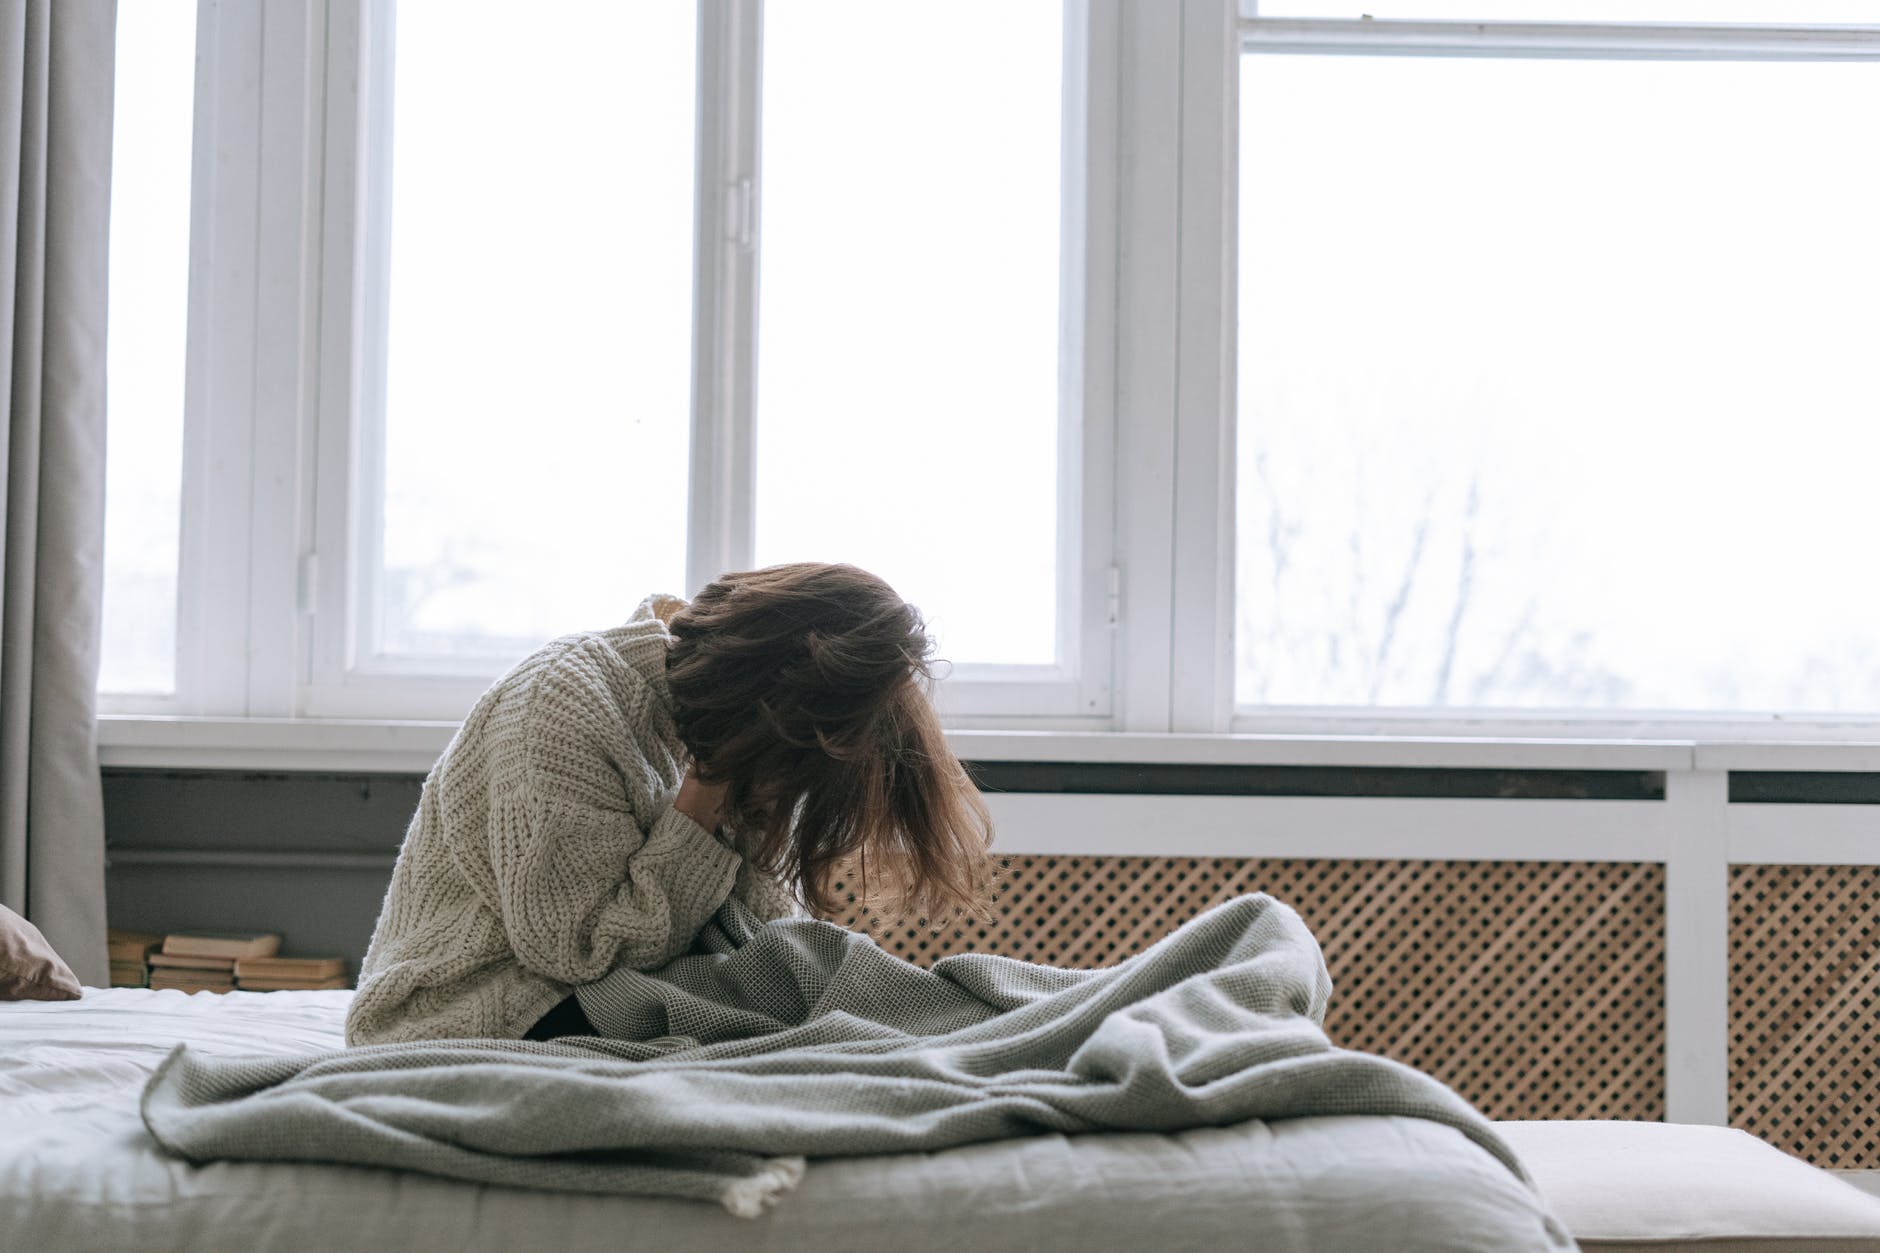 She woke up and had to listen to her angry parents. | Source: Pexels